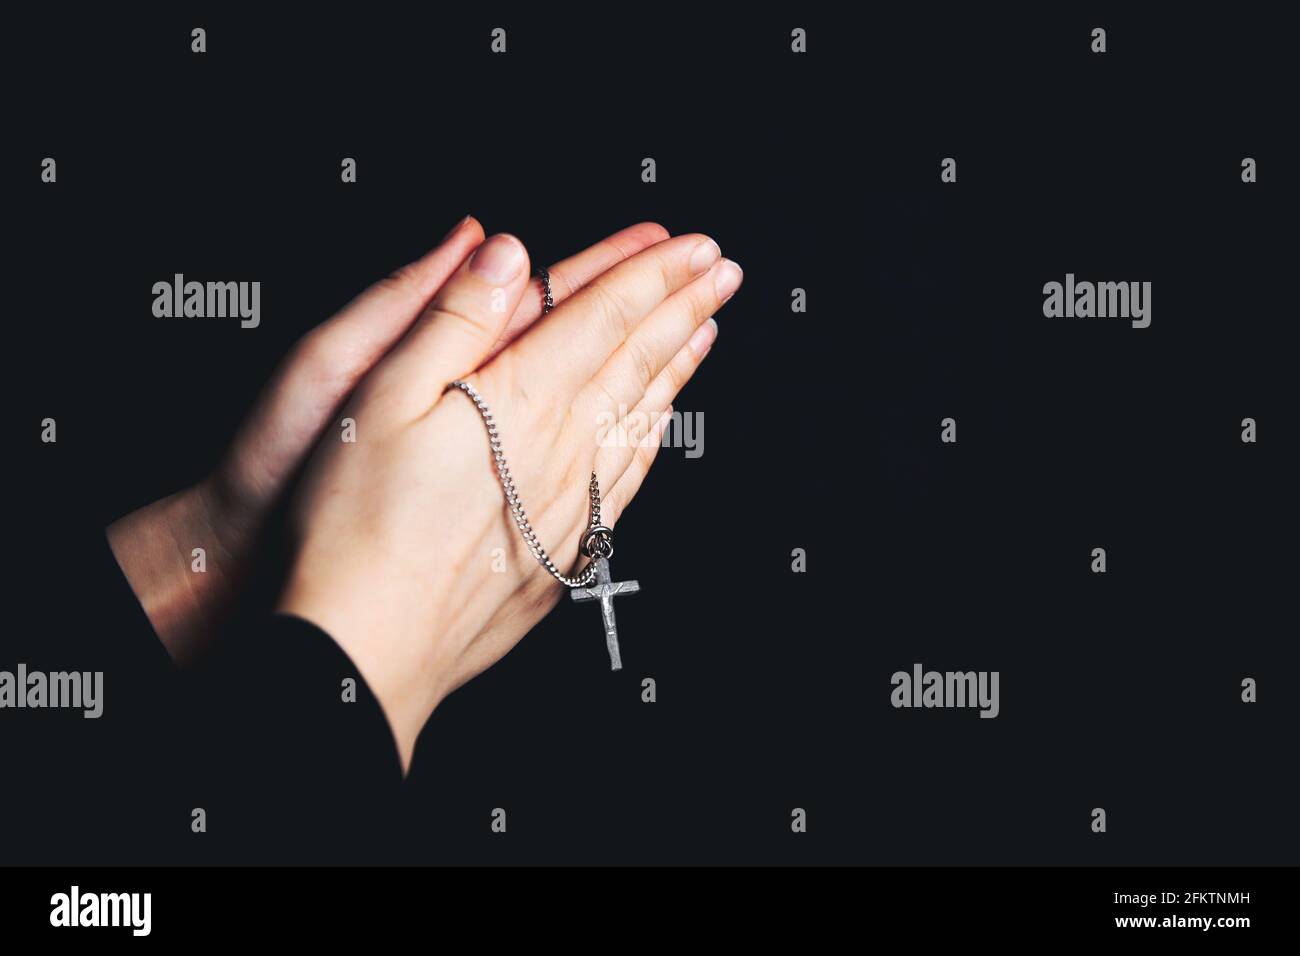 Praying hands holding a rosary, Closeup holding necklace with cross,pray for god in the dark, religious Christian symbol with copy space background. Stock Photo